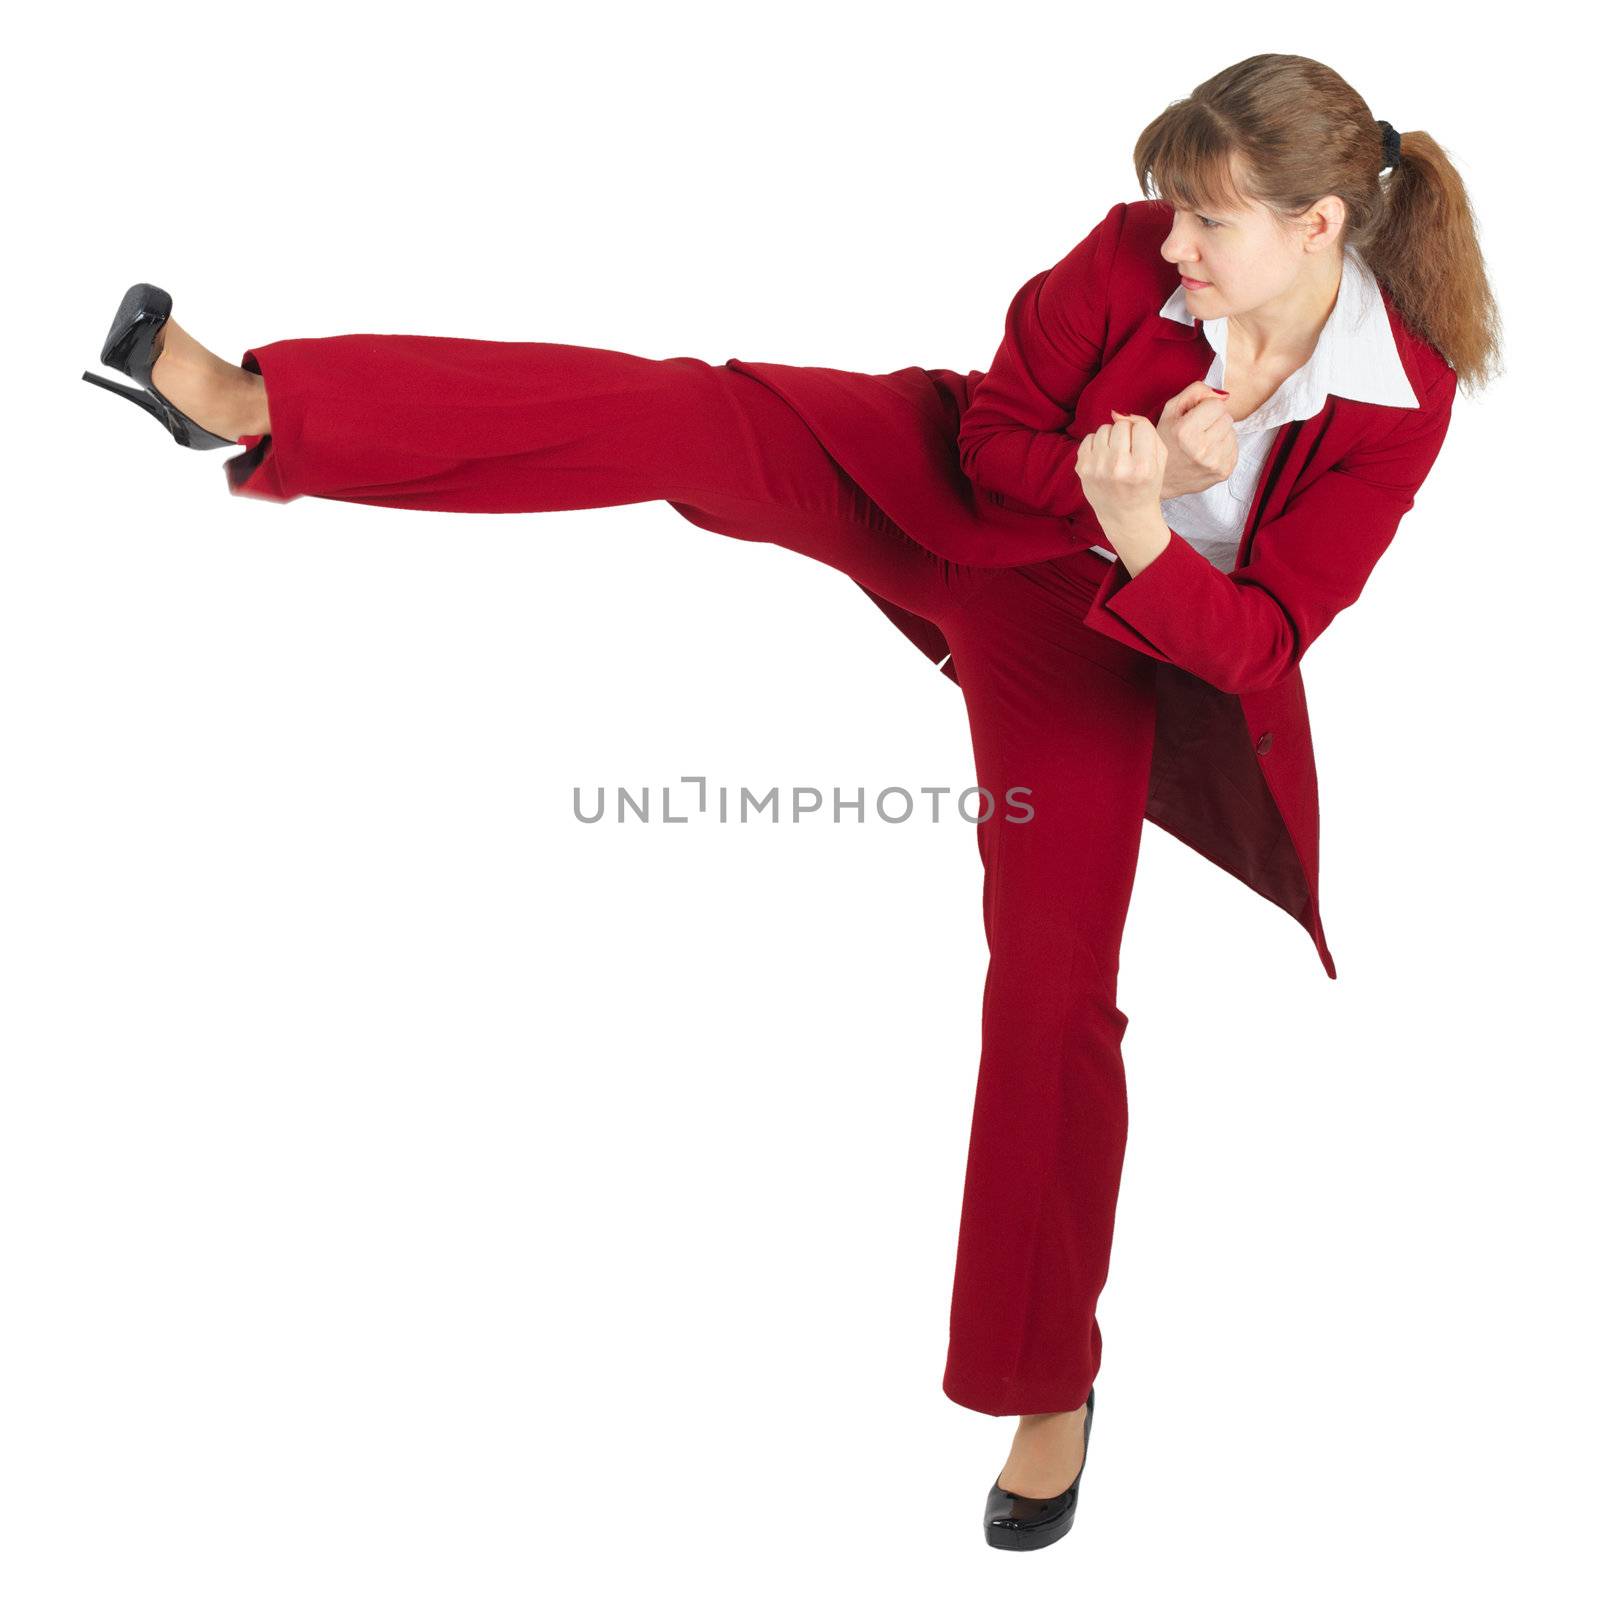 A woman does a heel strike your opponent, isolated on a white background